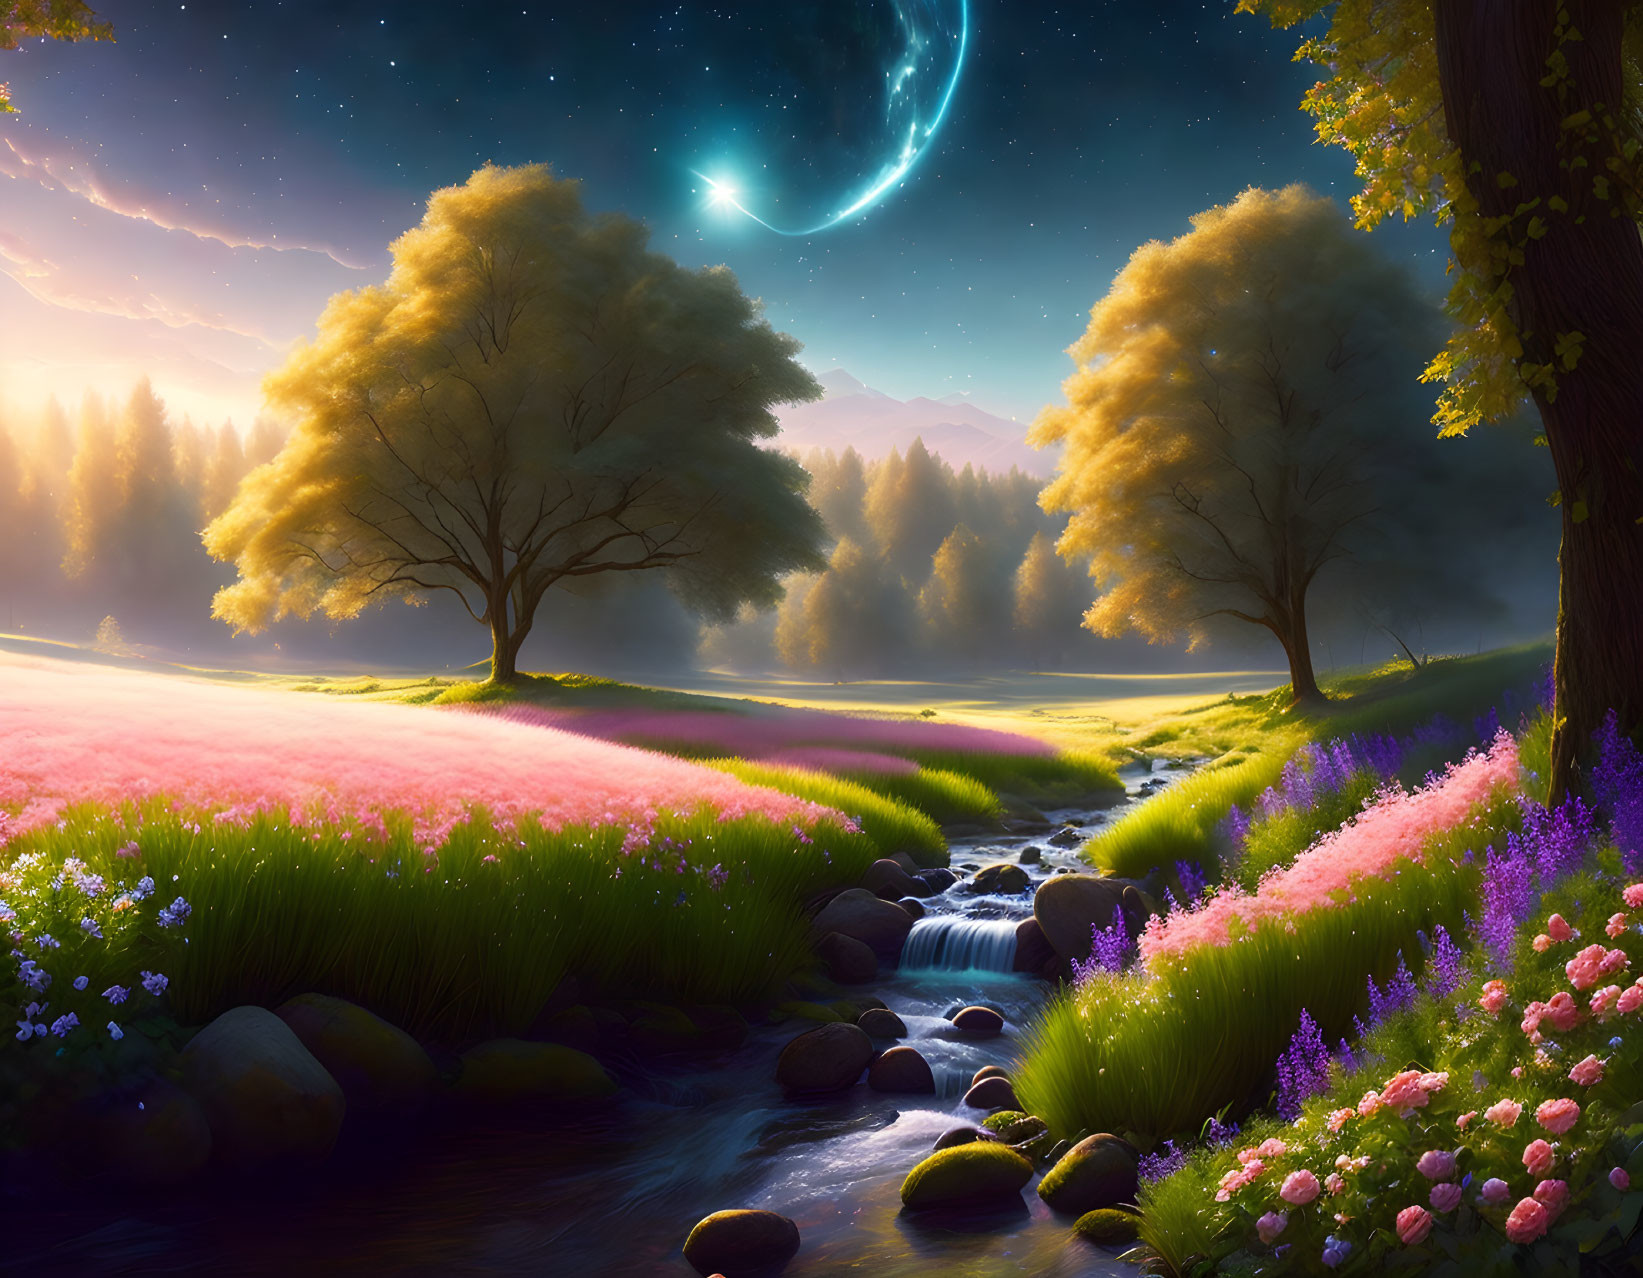 Twilight scene with crescent moon, illuminated trees, sparkling stream, colorful flowers, distant mountains